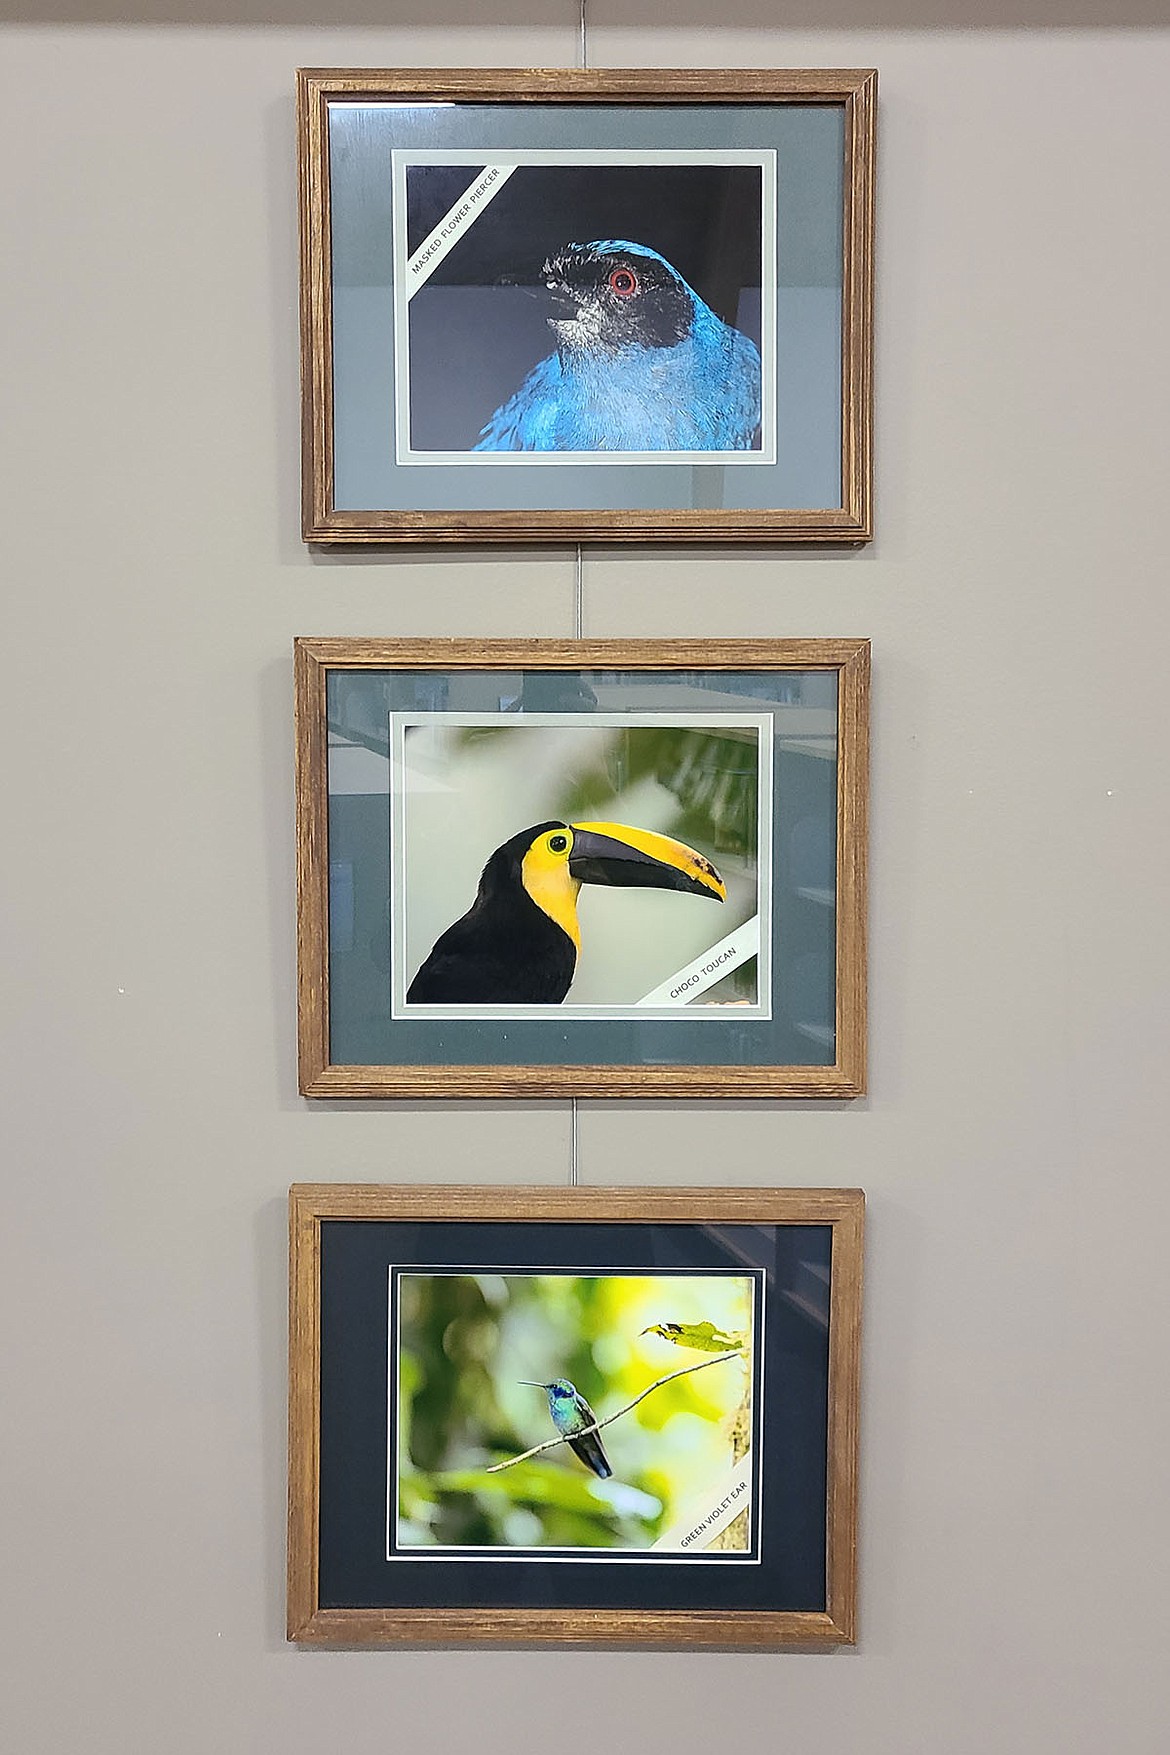 Photos of tropical birds by Larry Youmans on display at ImagineIF library in Columbia Falls